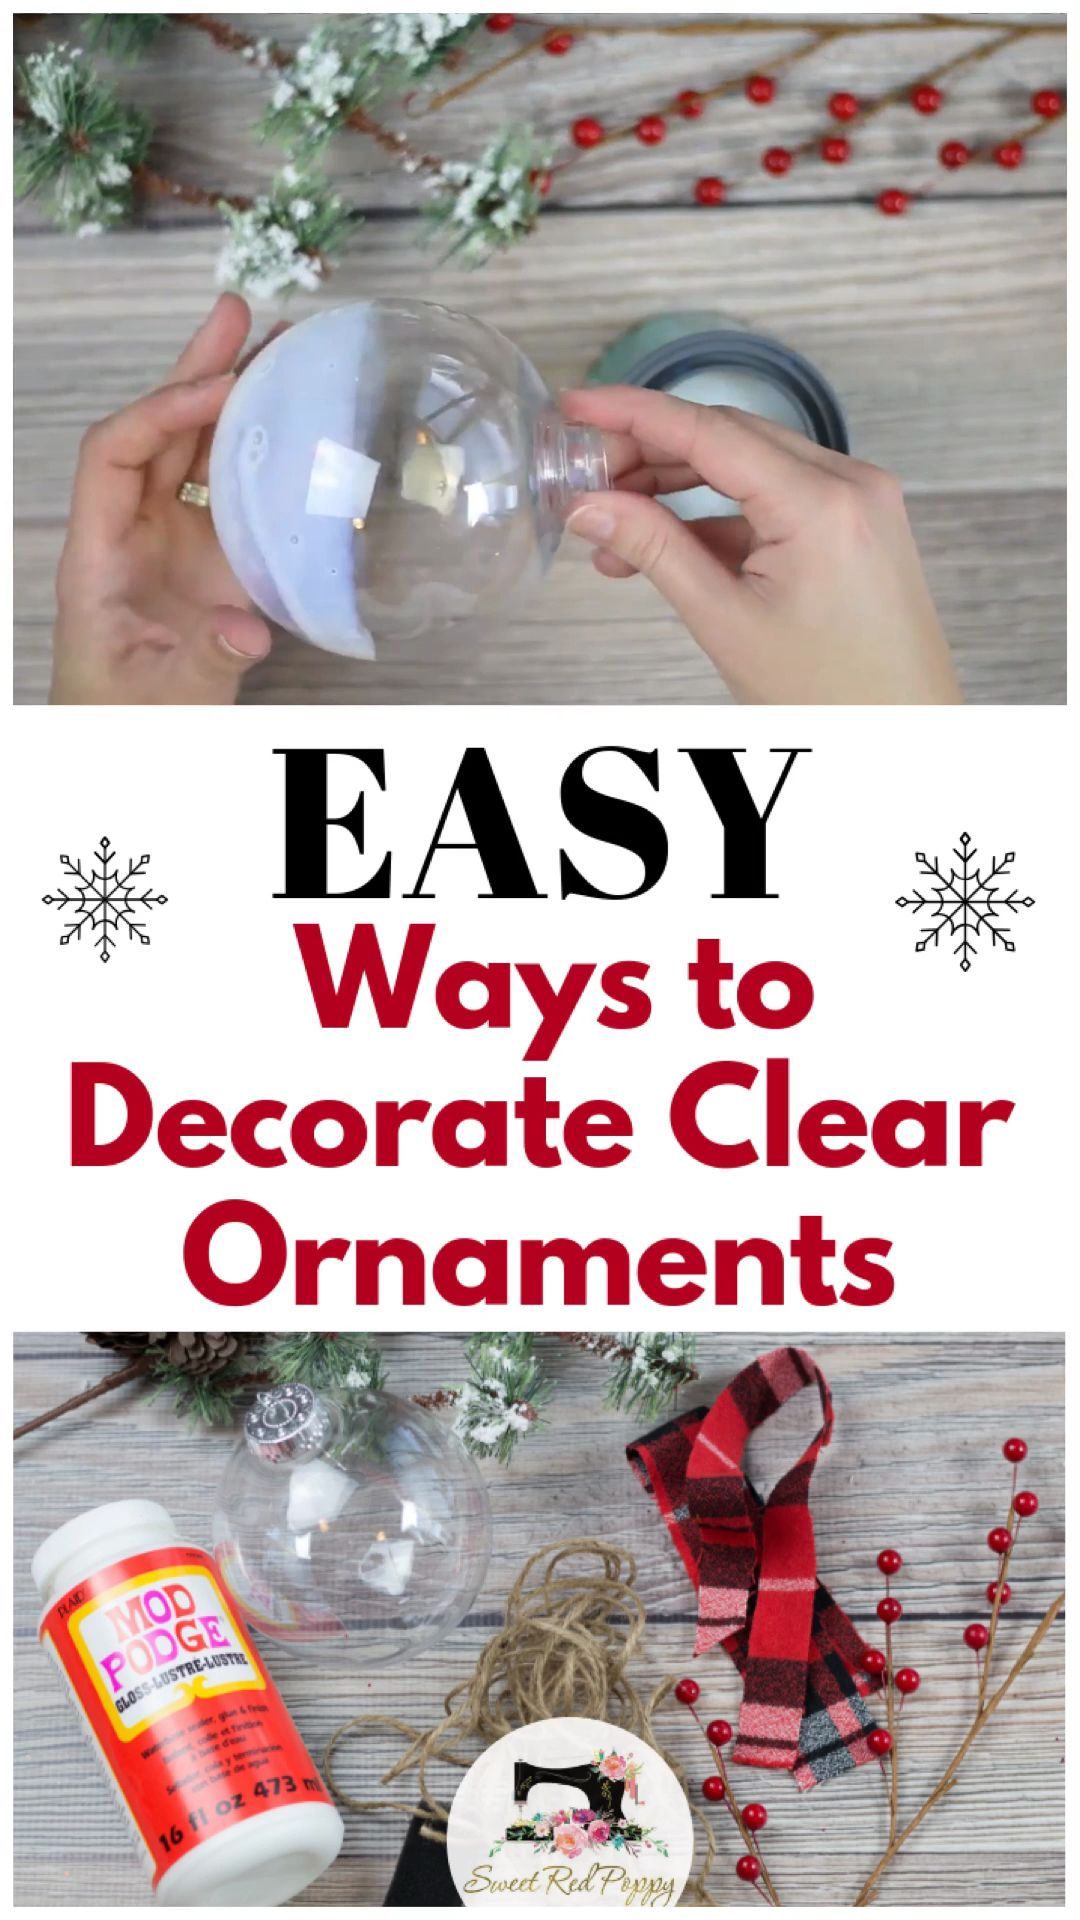 10 diy Christmas Decorations for party ideas